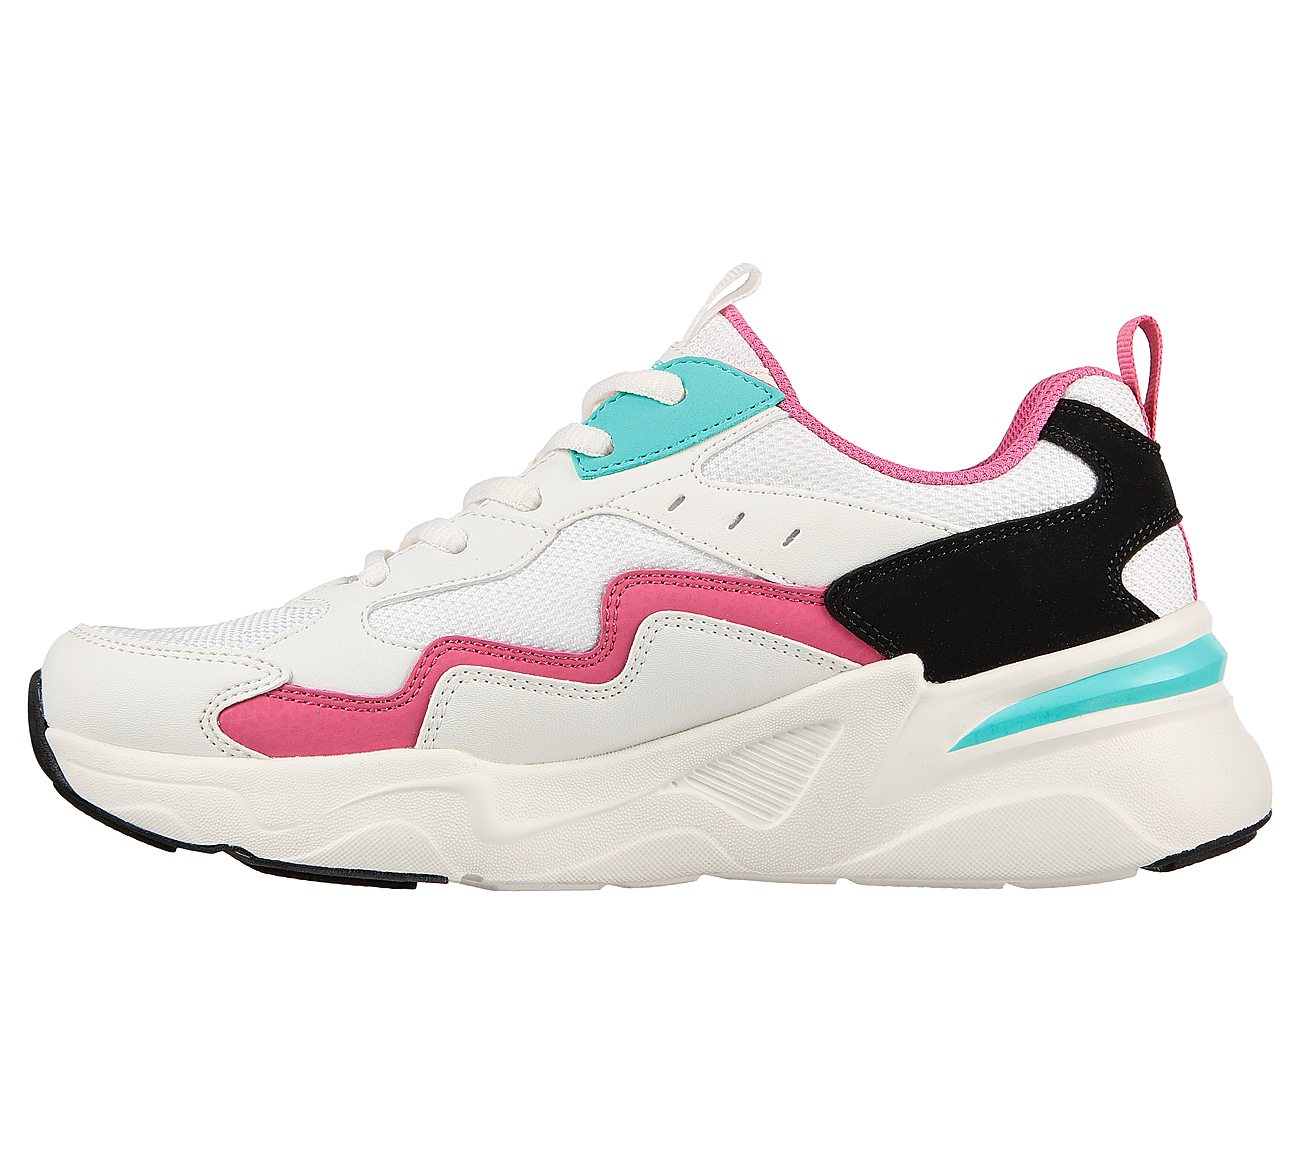 BOBS BAMINA-ZIGZAGGER, WHITE/PINK/TURQUOISE Footwear Left View